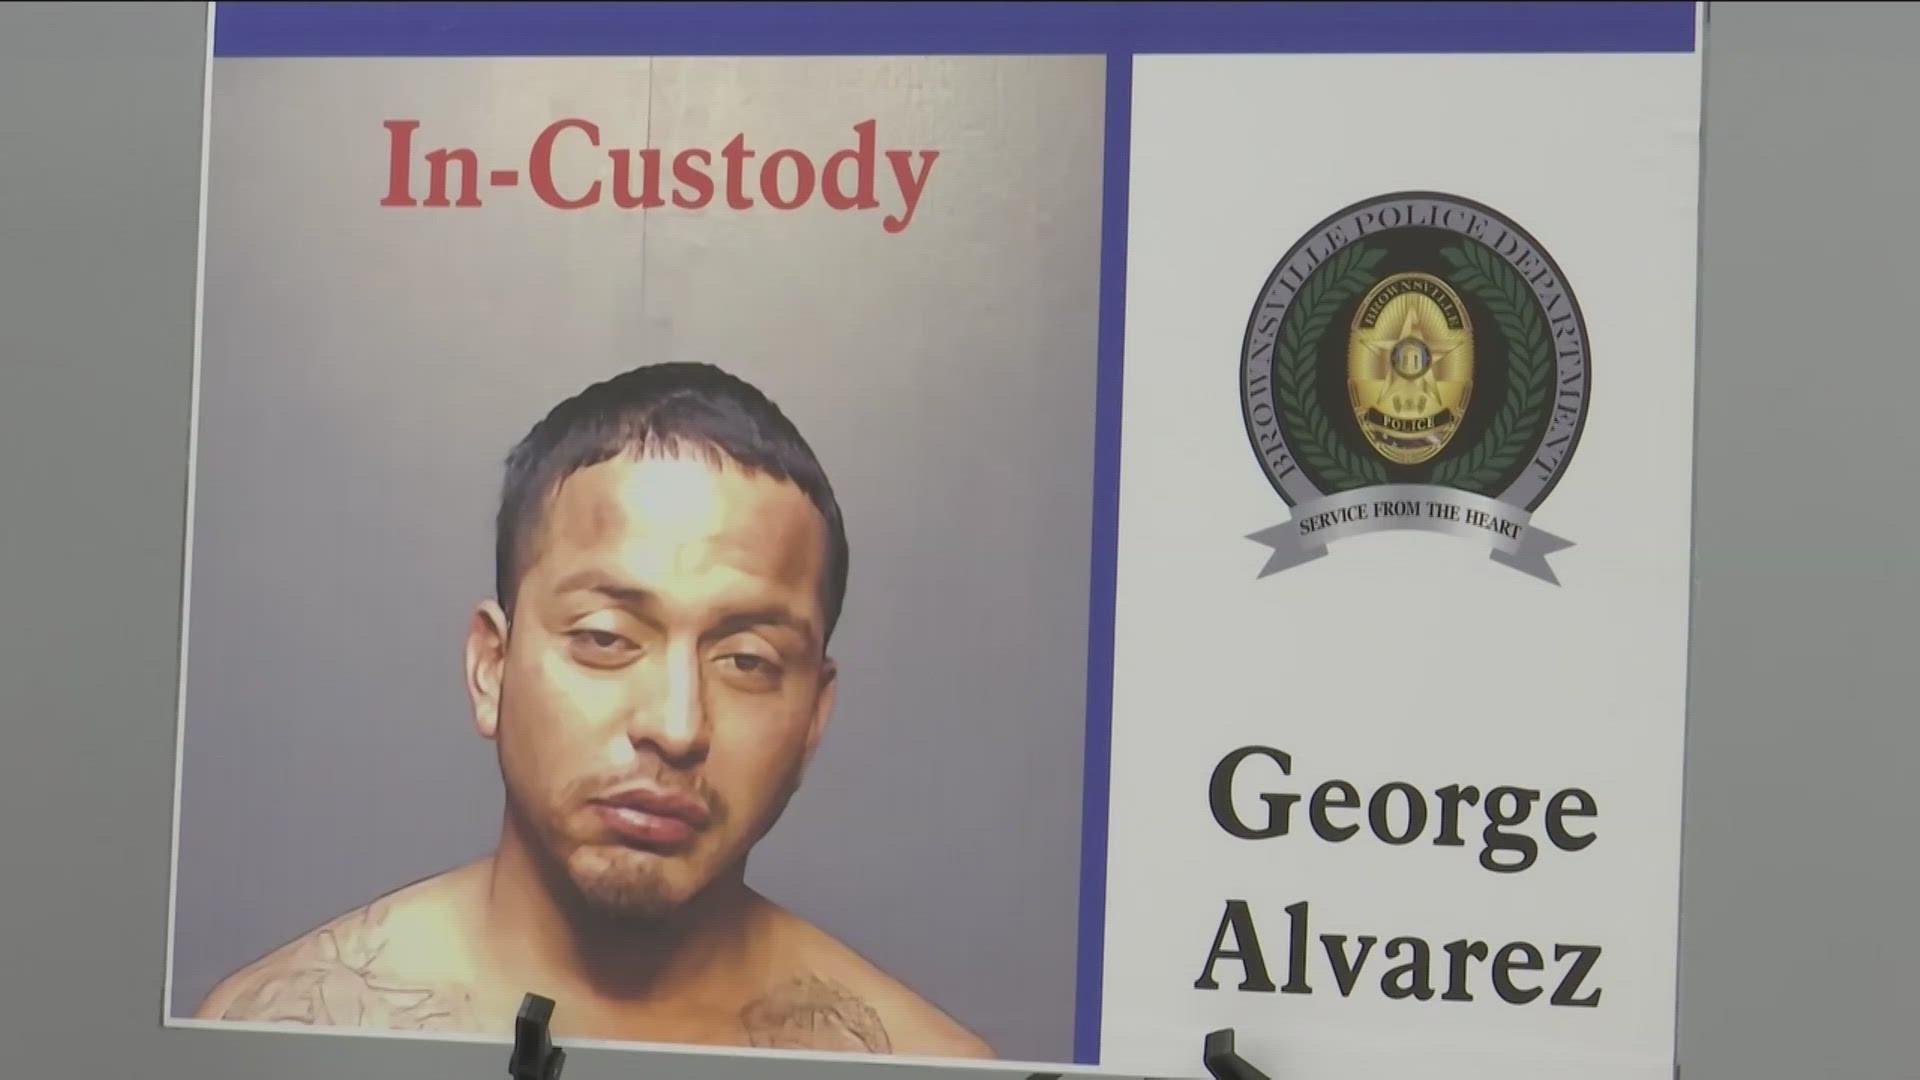 George Alvarez has an 'extensive rap sheet,' according to police, and has been charged with eight counts of manslaughter, 10 counts of aggravated assault.